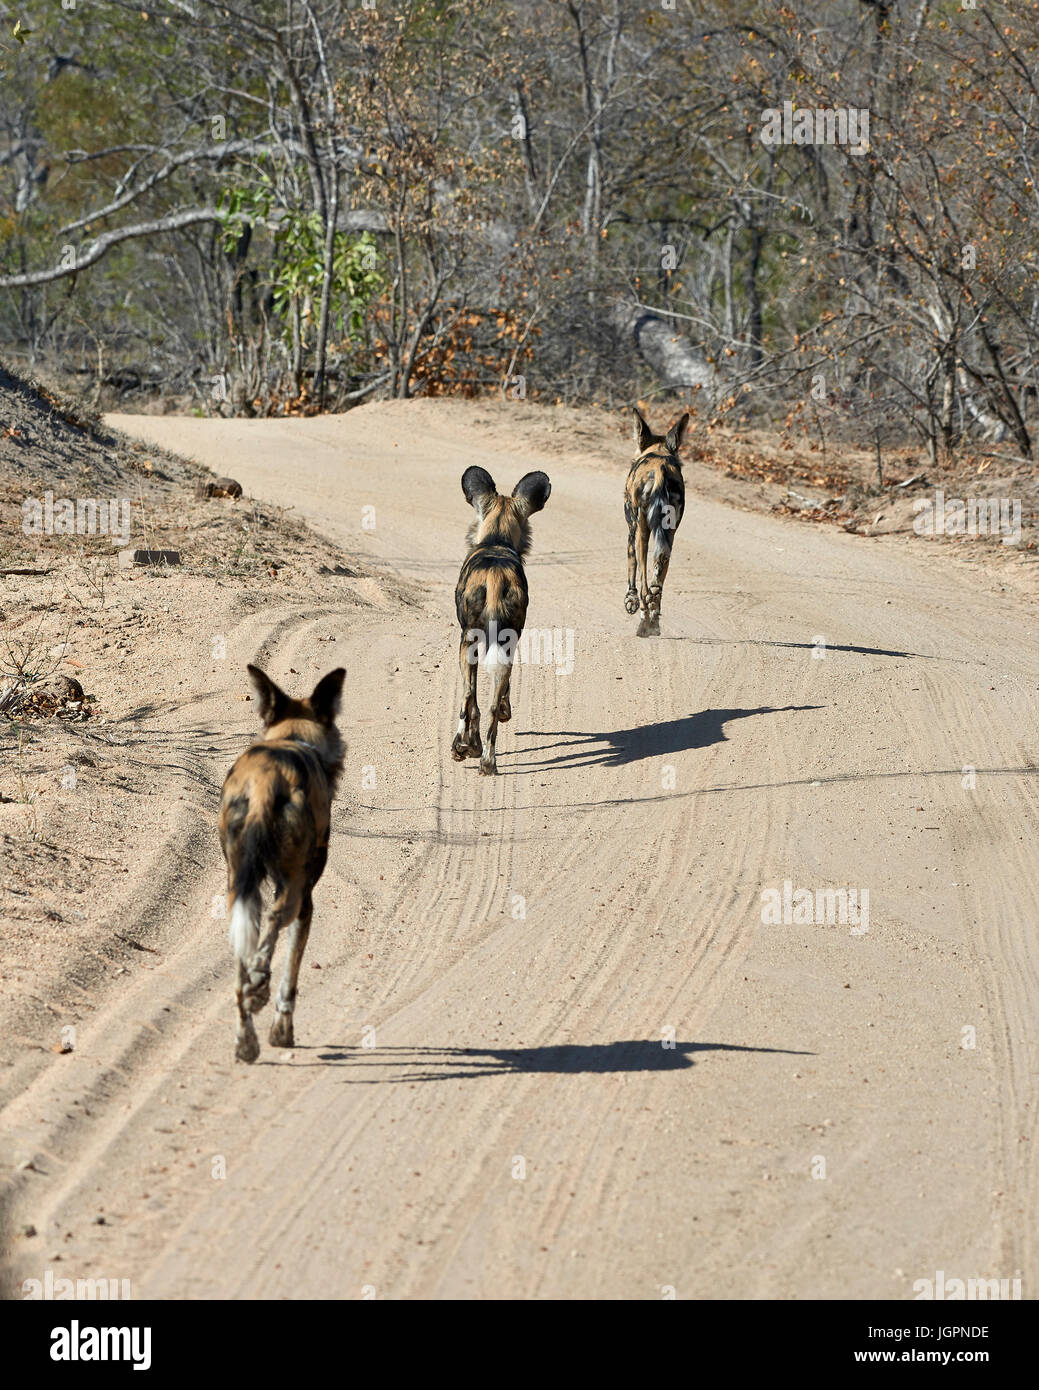 African Wild Dog, Lycoon pictus, three animals trotting along the road, Sabi Sands game reserve, South Africa Stock Photo